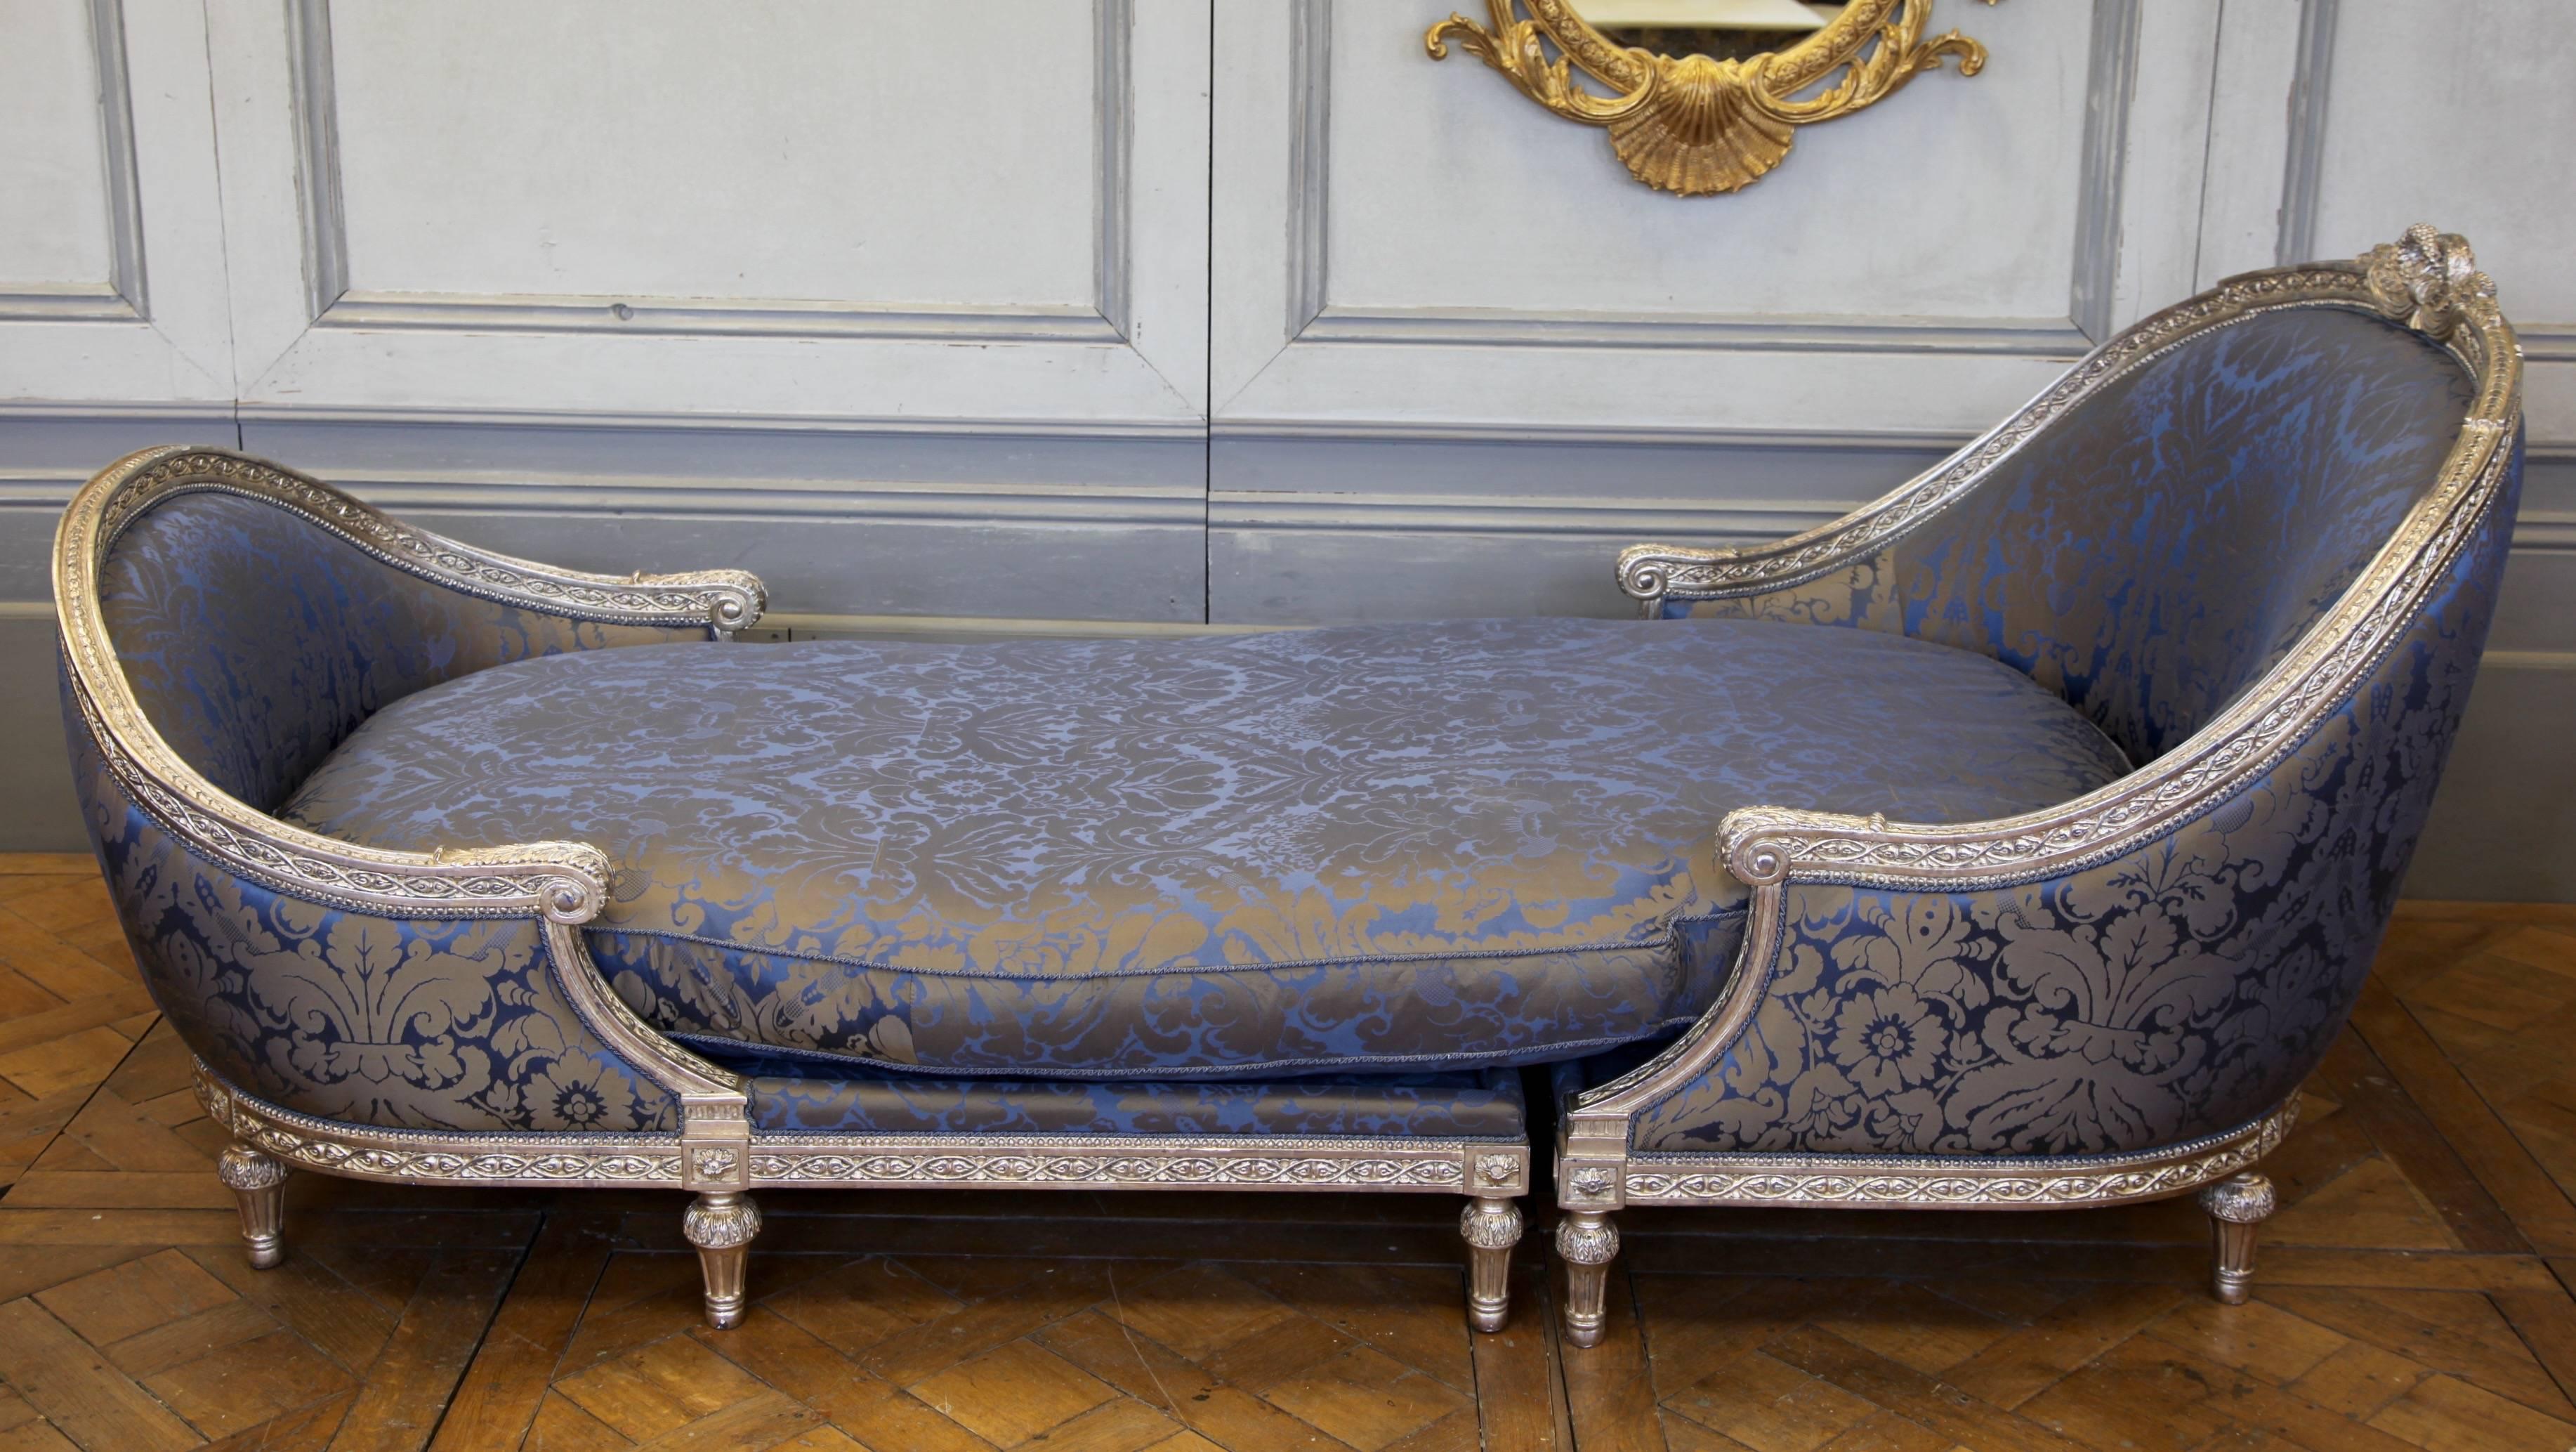 An impressive, statement piece, Louis XVI style chaise longue based on an antique chair from Coco Chanel's apartment. Hand-carved and hand finished in sterling silver leaf. Fully upholstered in a complementary damask fabric.